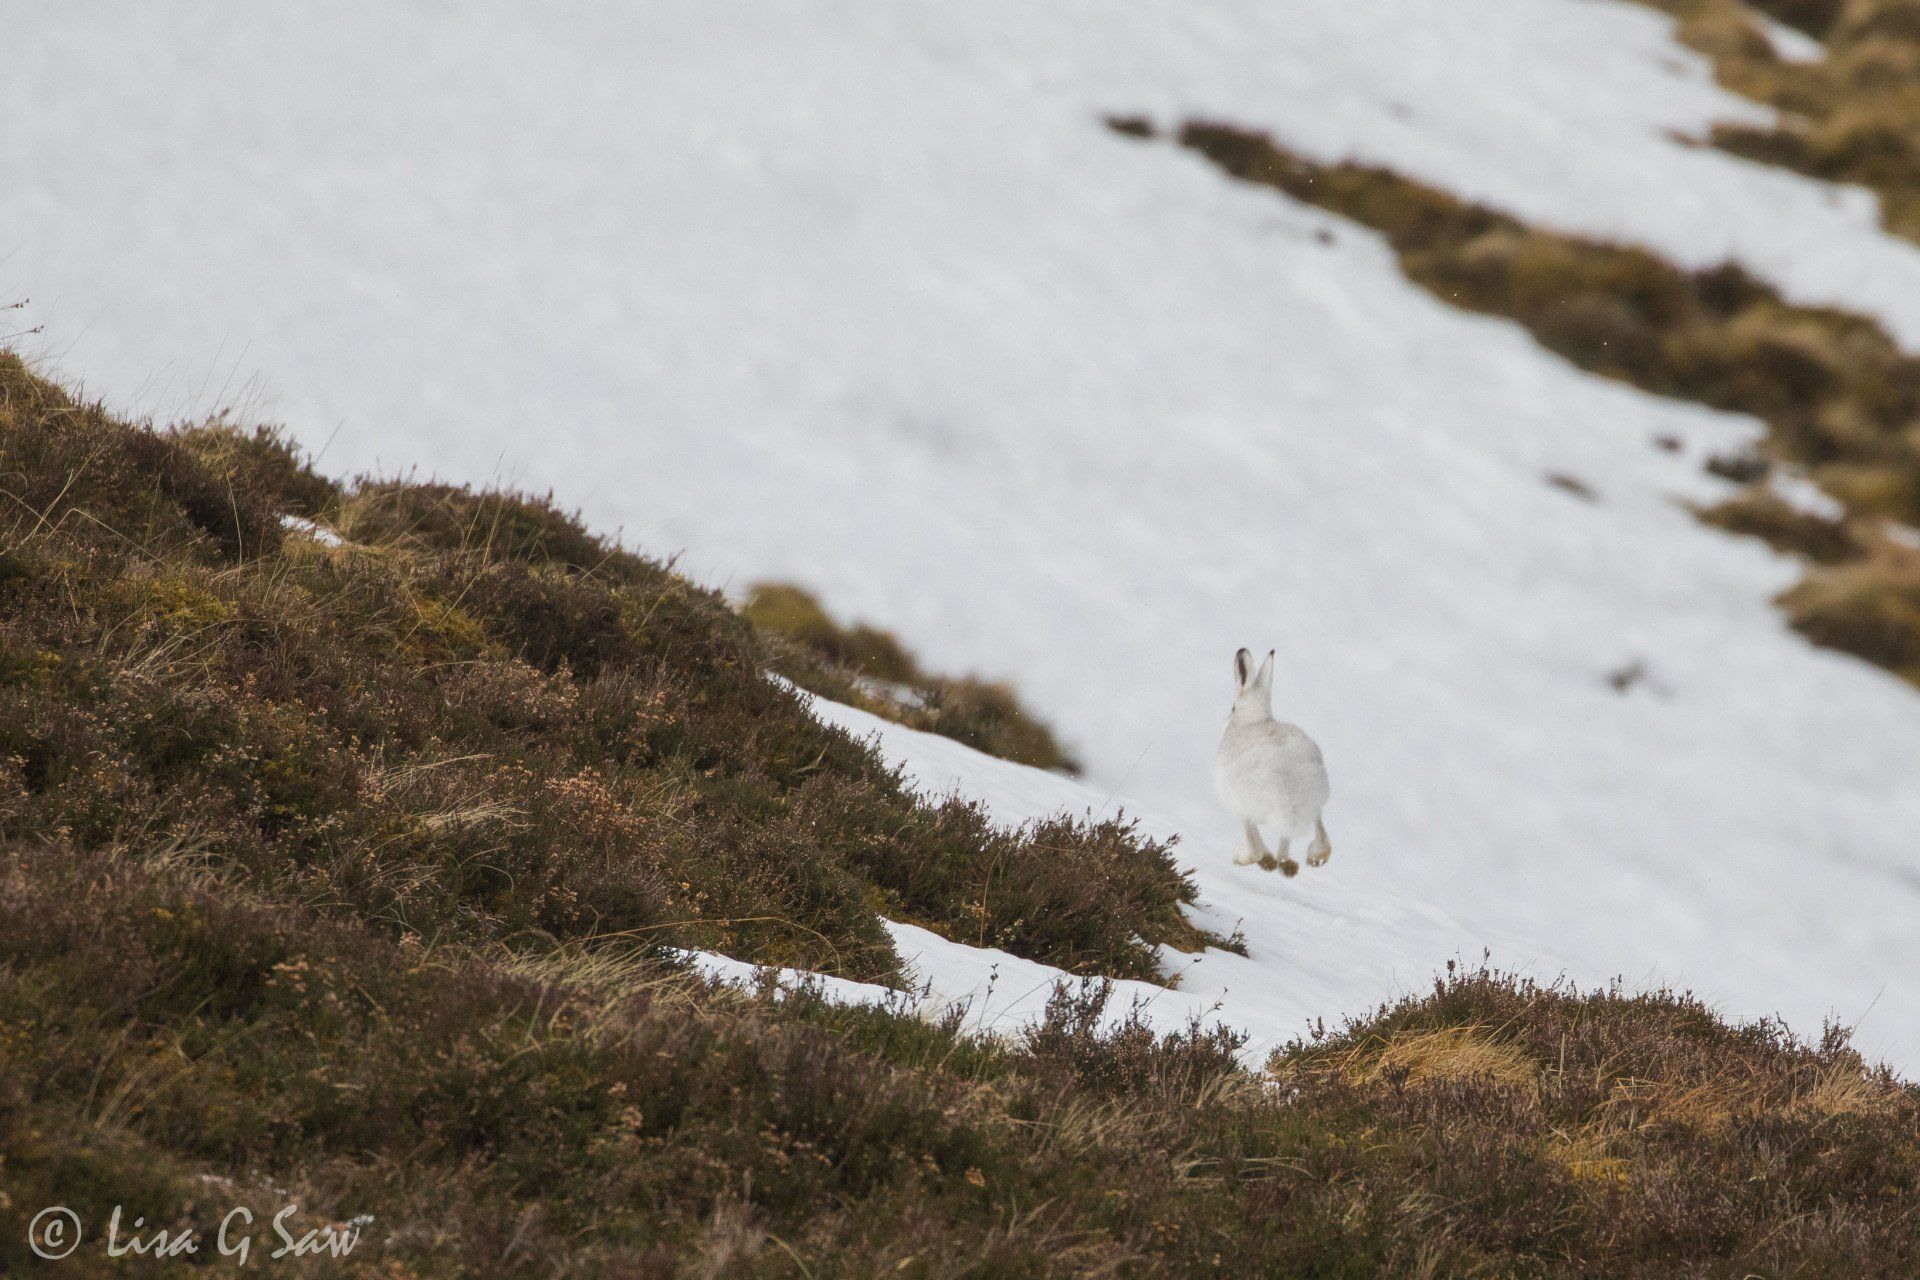 White Mountain Hare in winter pelage bounding away over snow